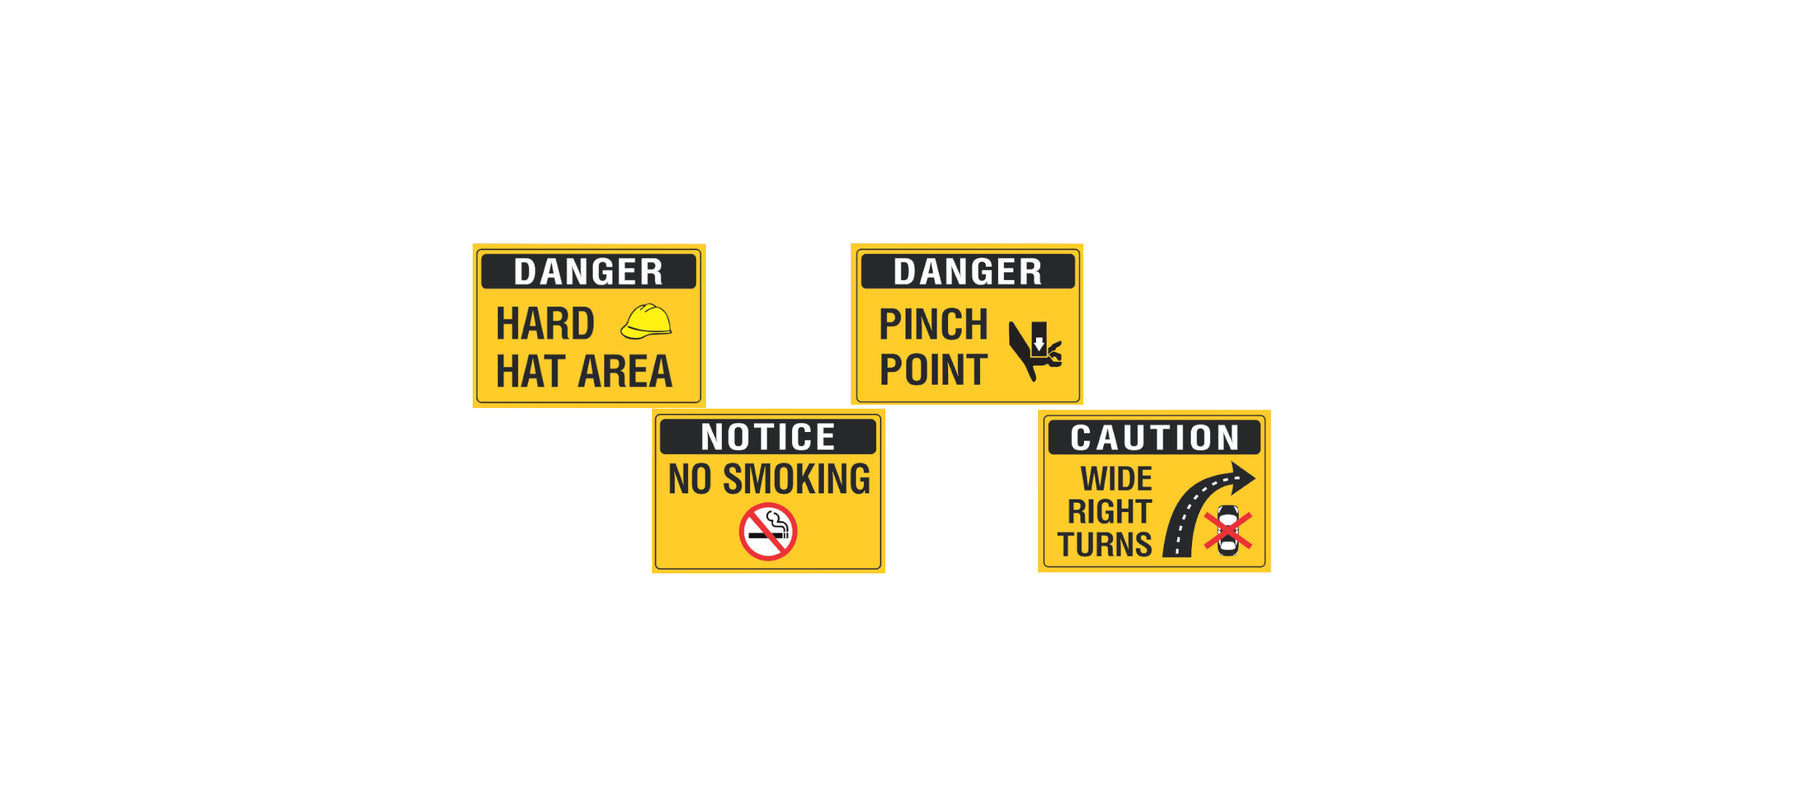 New Products - Vinyl safety stickers.